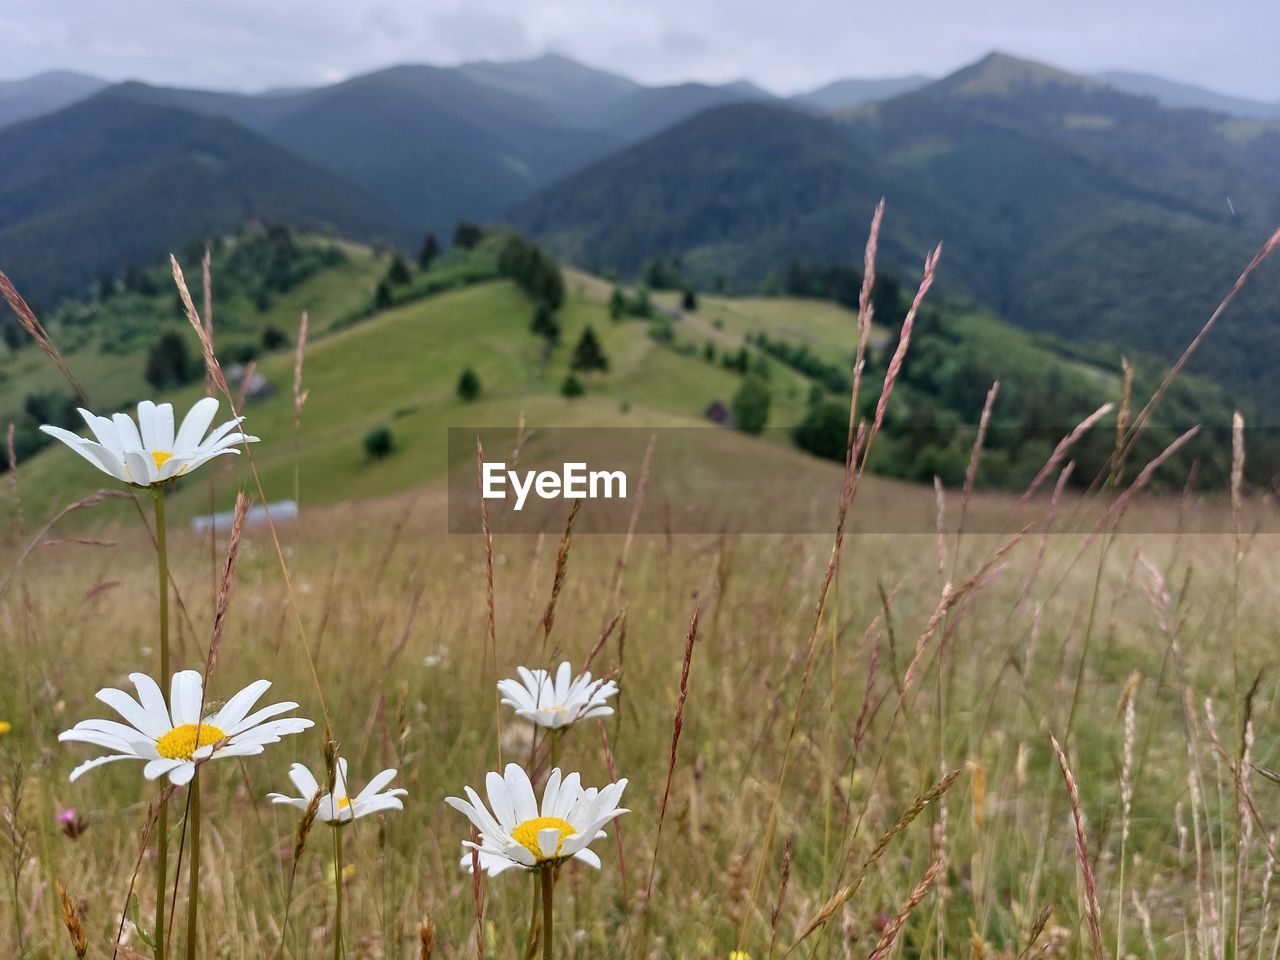 plant, flower, flowering plant, mountain, grassland, meadow, beauty in nature, field, nature, environment, landscape, freshness, mountain range, natural environment, prairie, grass, land, scenics - nature, no people, sky, wildflower, growth, plain, tranquility, rural scene, outdoors, focus on foreground, close-up, white, daisy, rural area, springtime, fragility, non-urban scene, day, tranquil scene, travel destinations, flower head, pasture, blossom, inflorescence, summer, travel, yellow